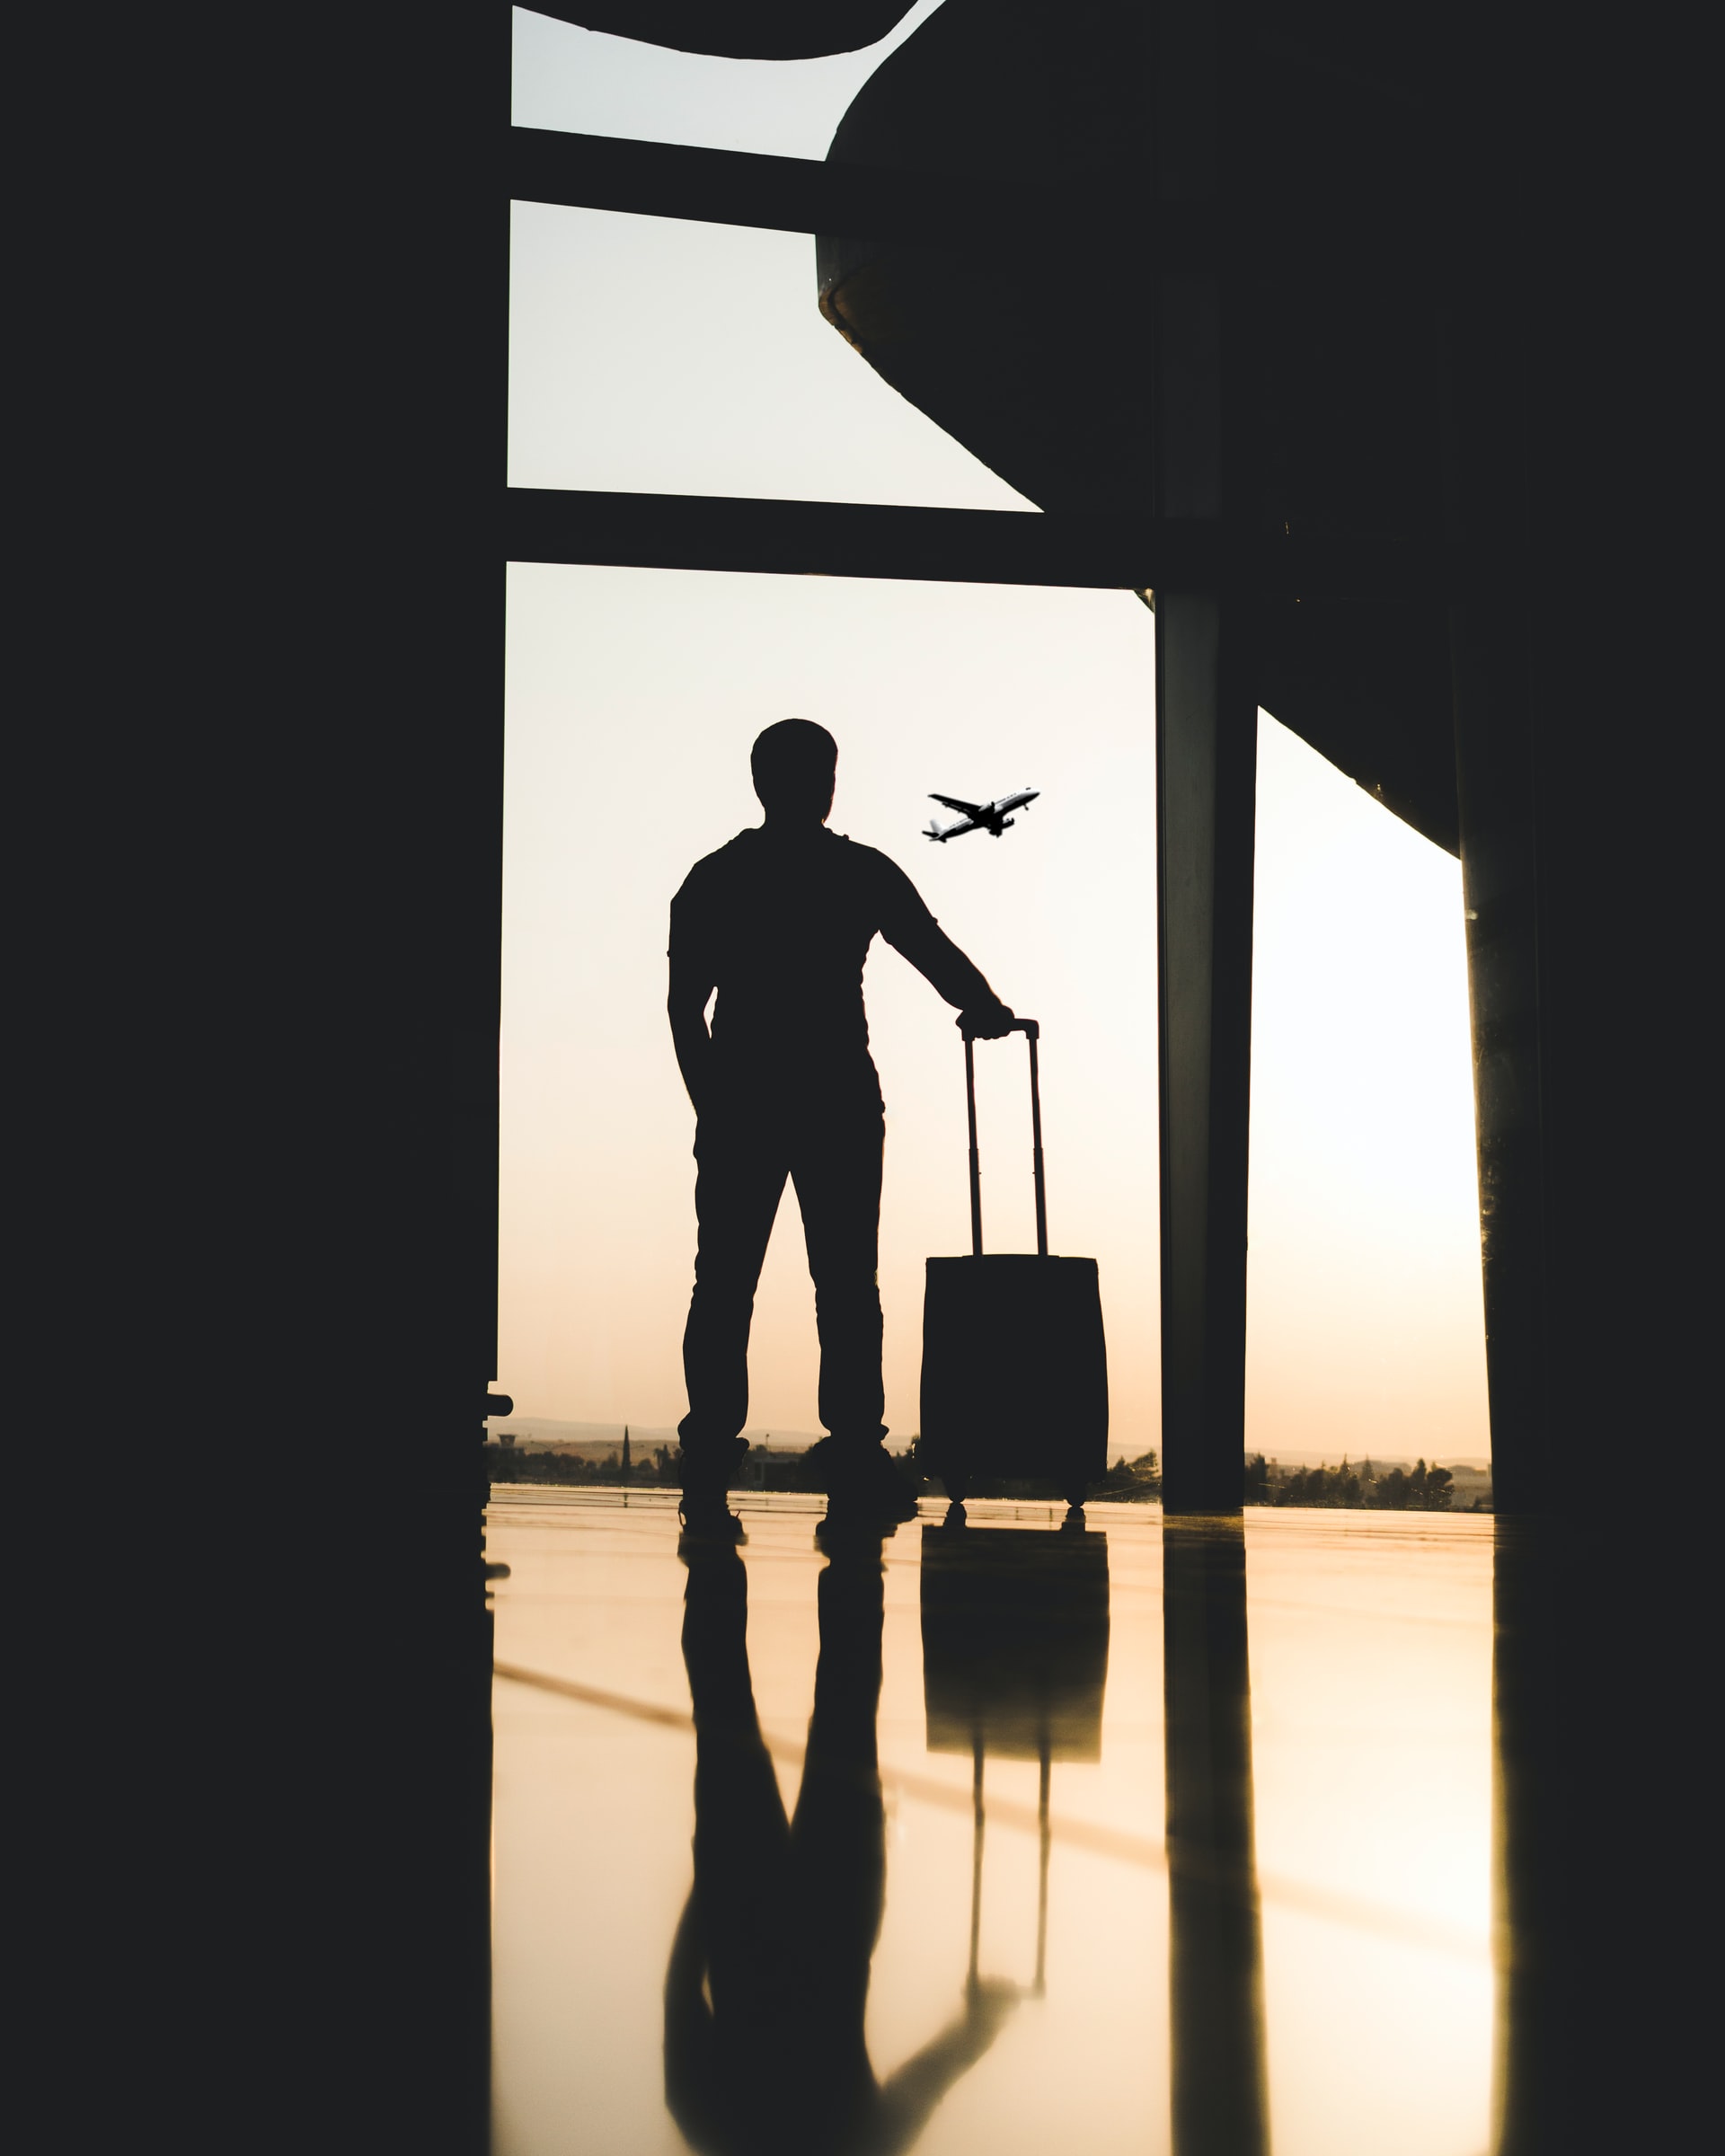 man with a suitcase silhouetted against an airport window watching a plane